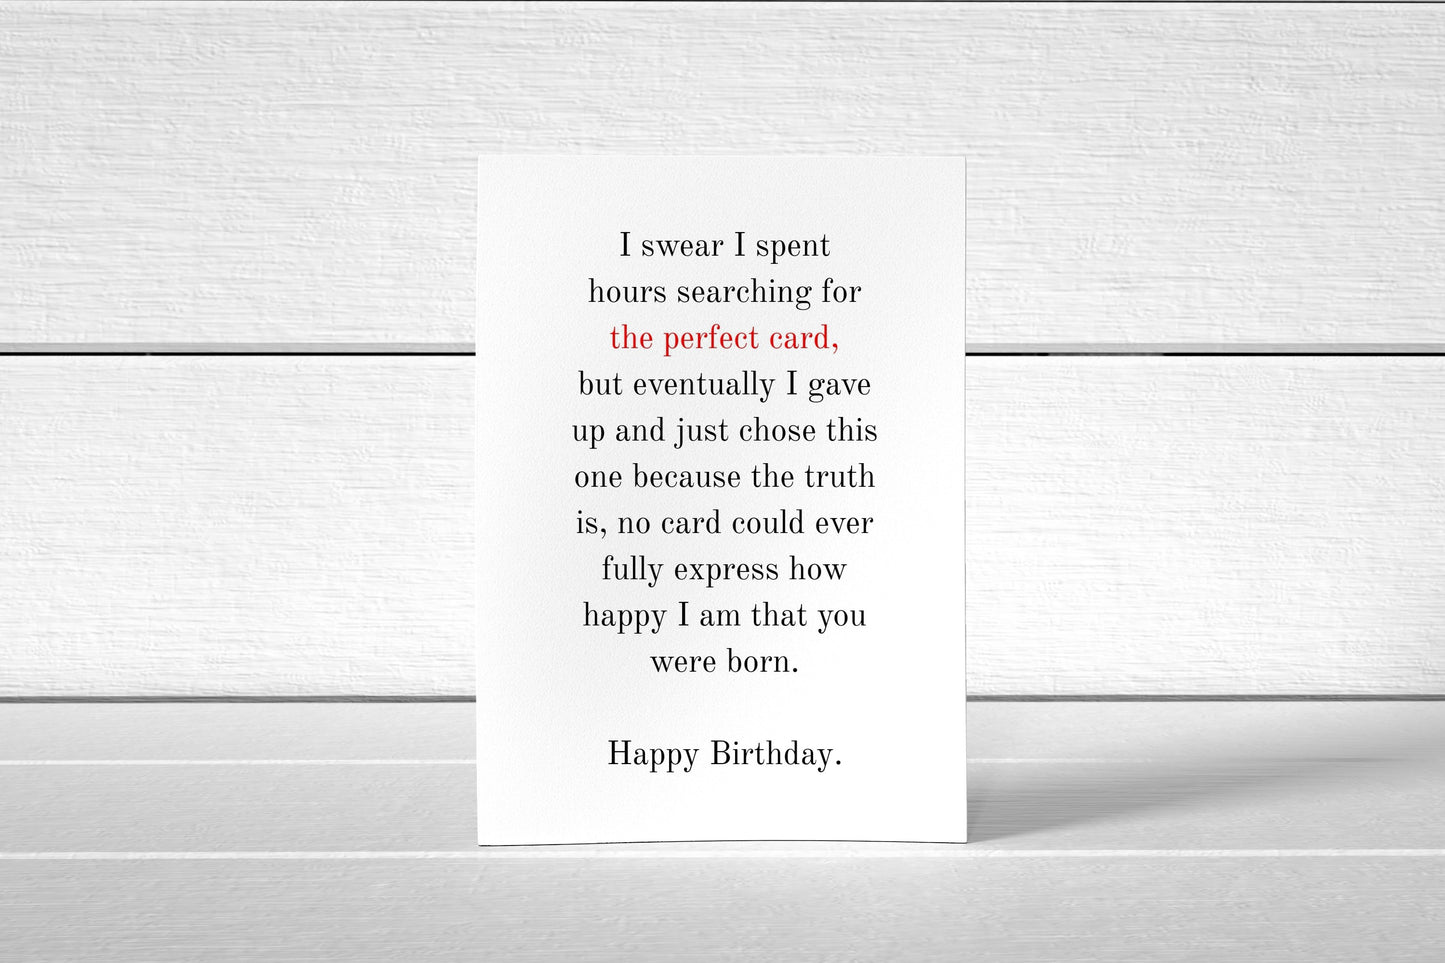 Birthday Card | Searching For The Perfect Card | Funny Card | Joke Card - Dinky Designs